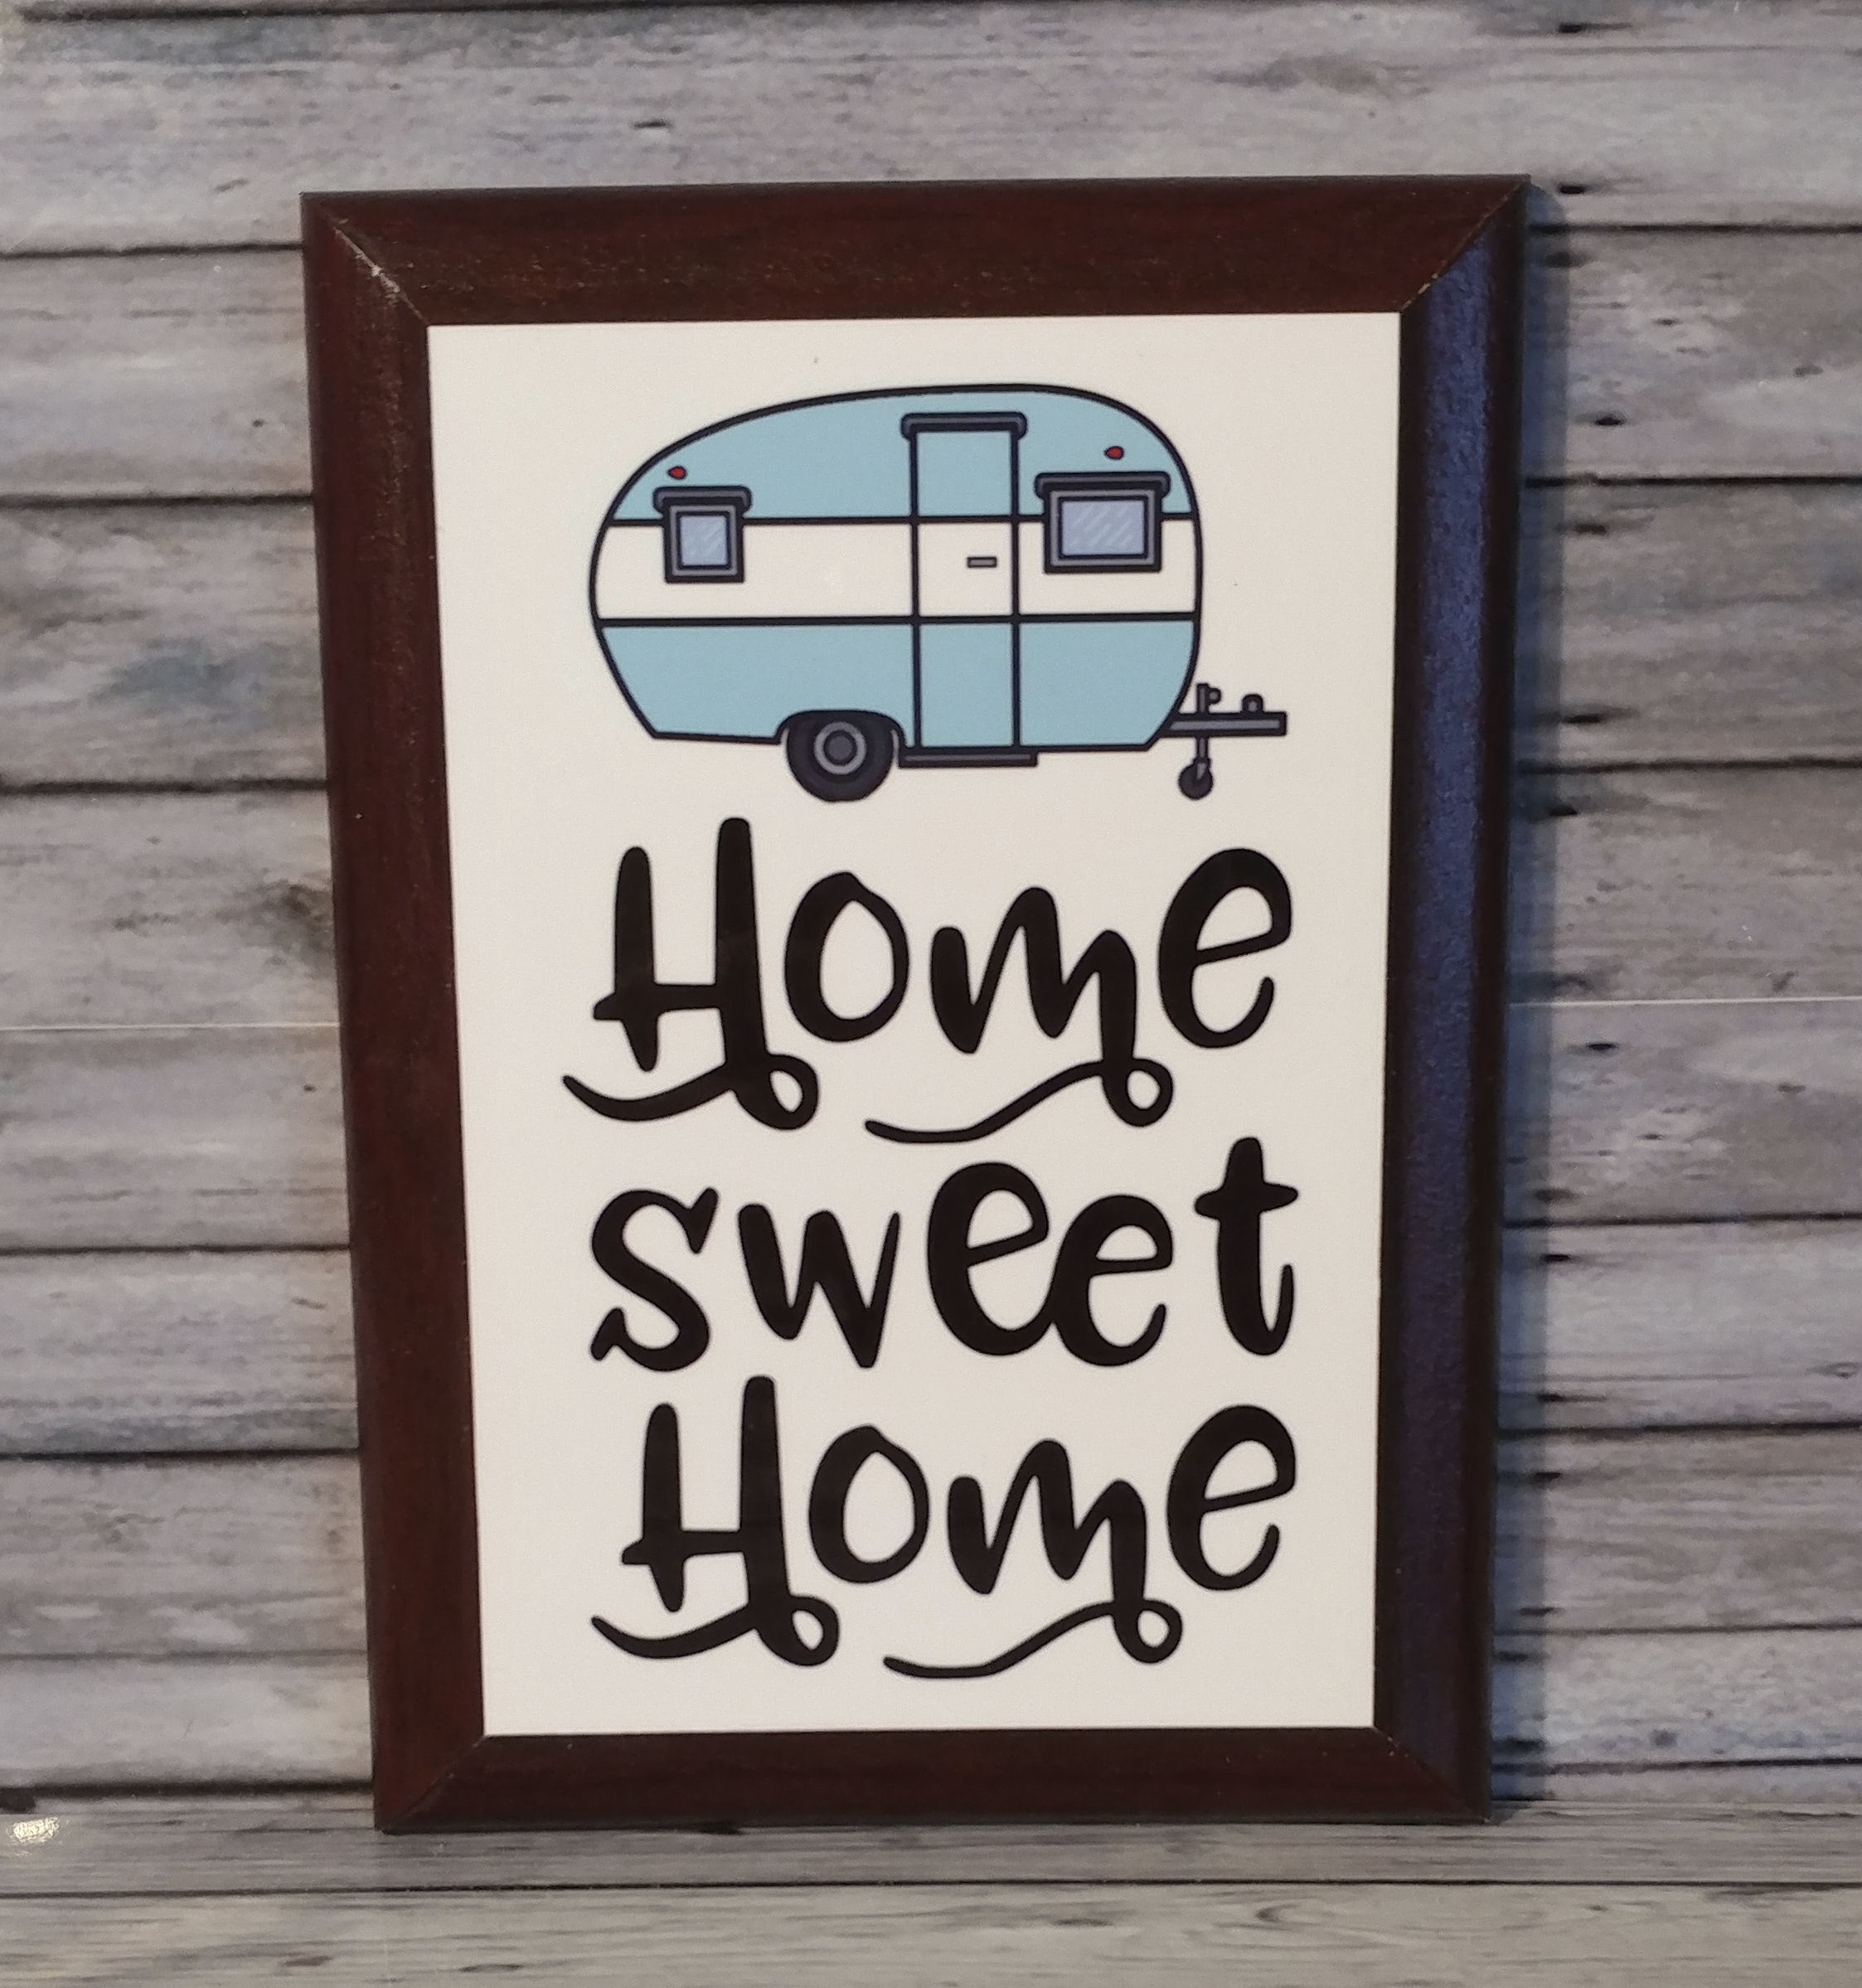 Home Sweet Home made with sublimation printing